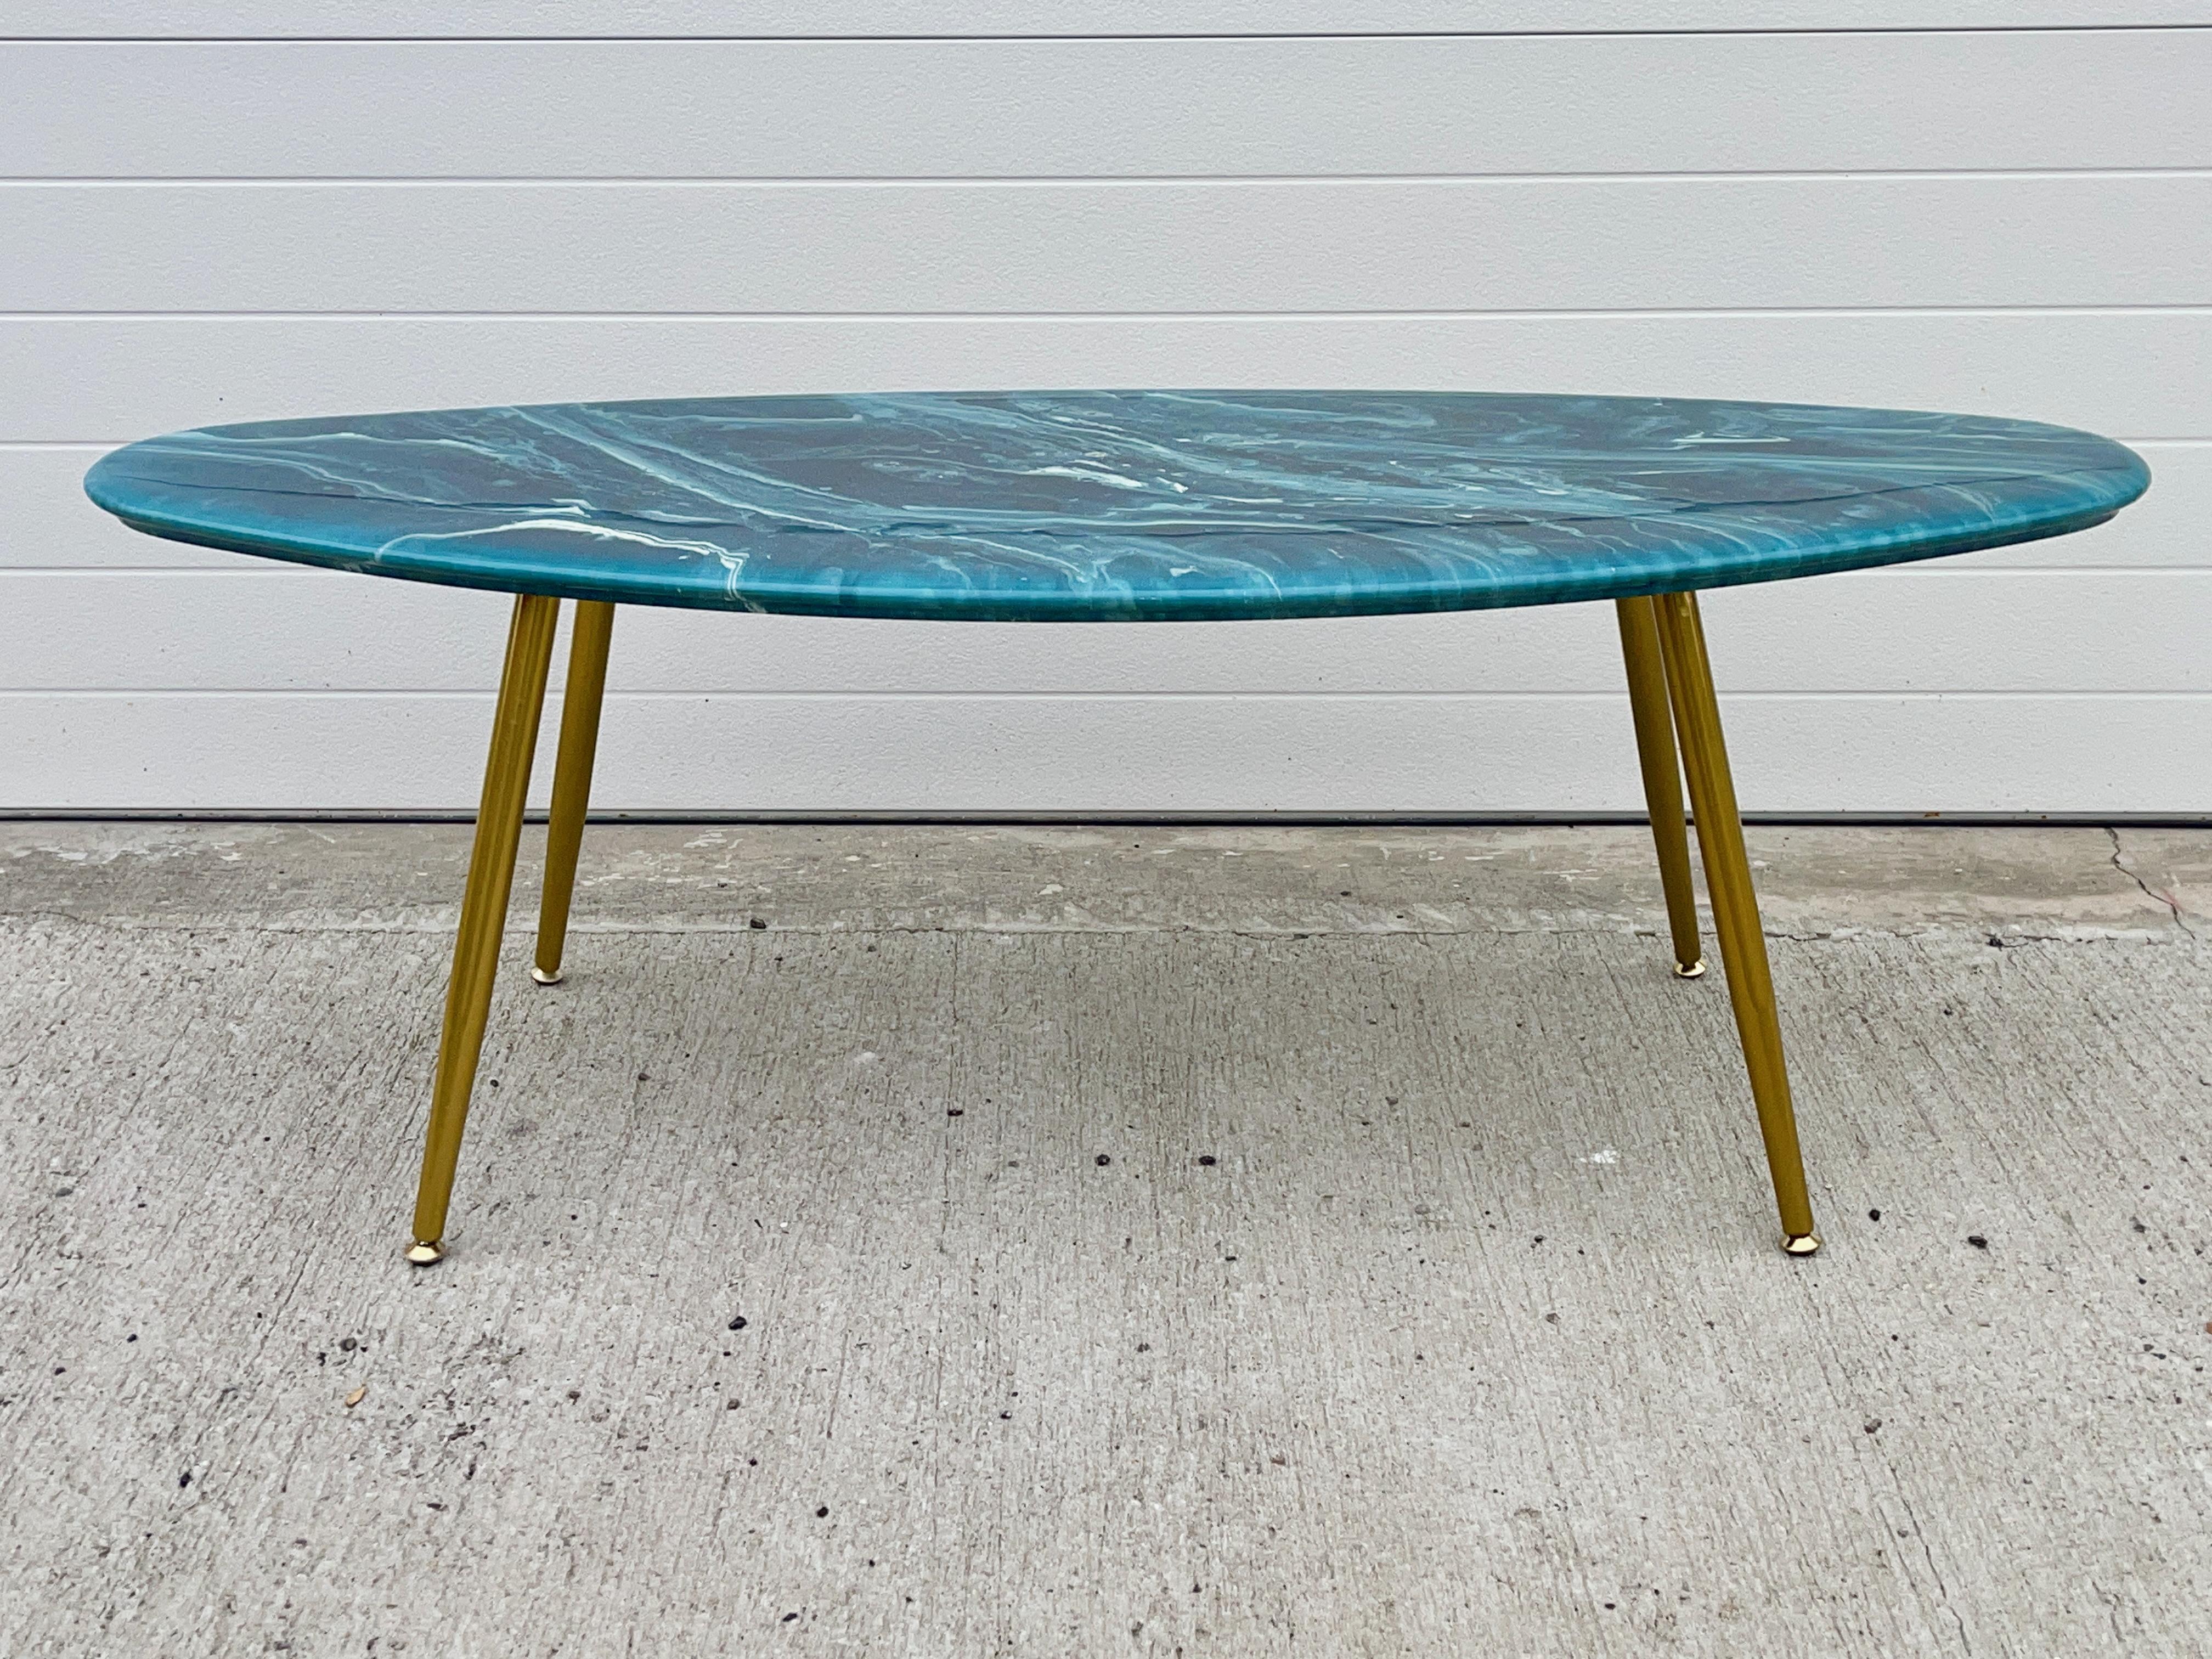 Surfboard shaped cocktail table comprised of a 